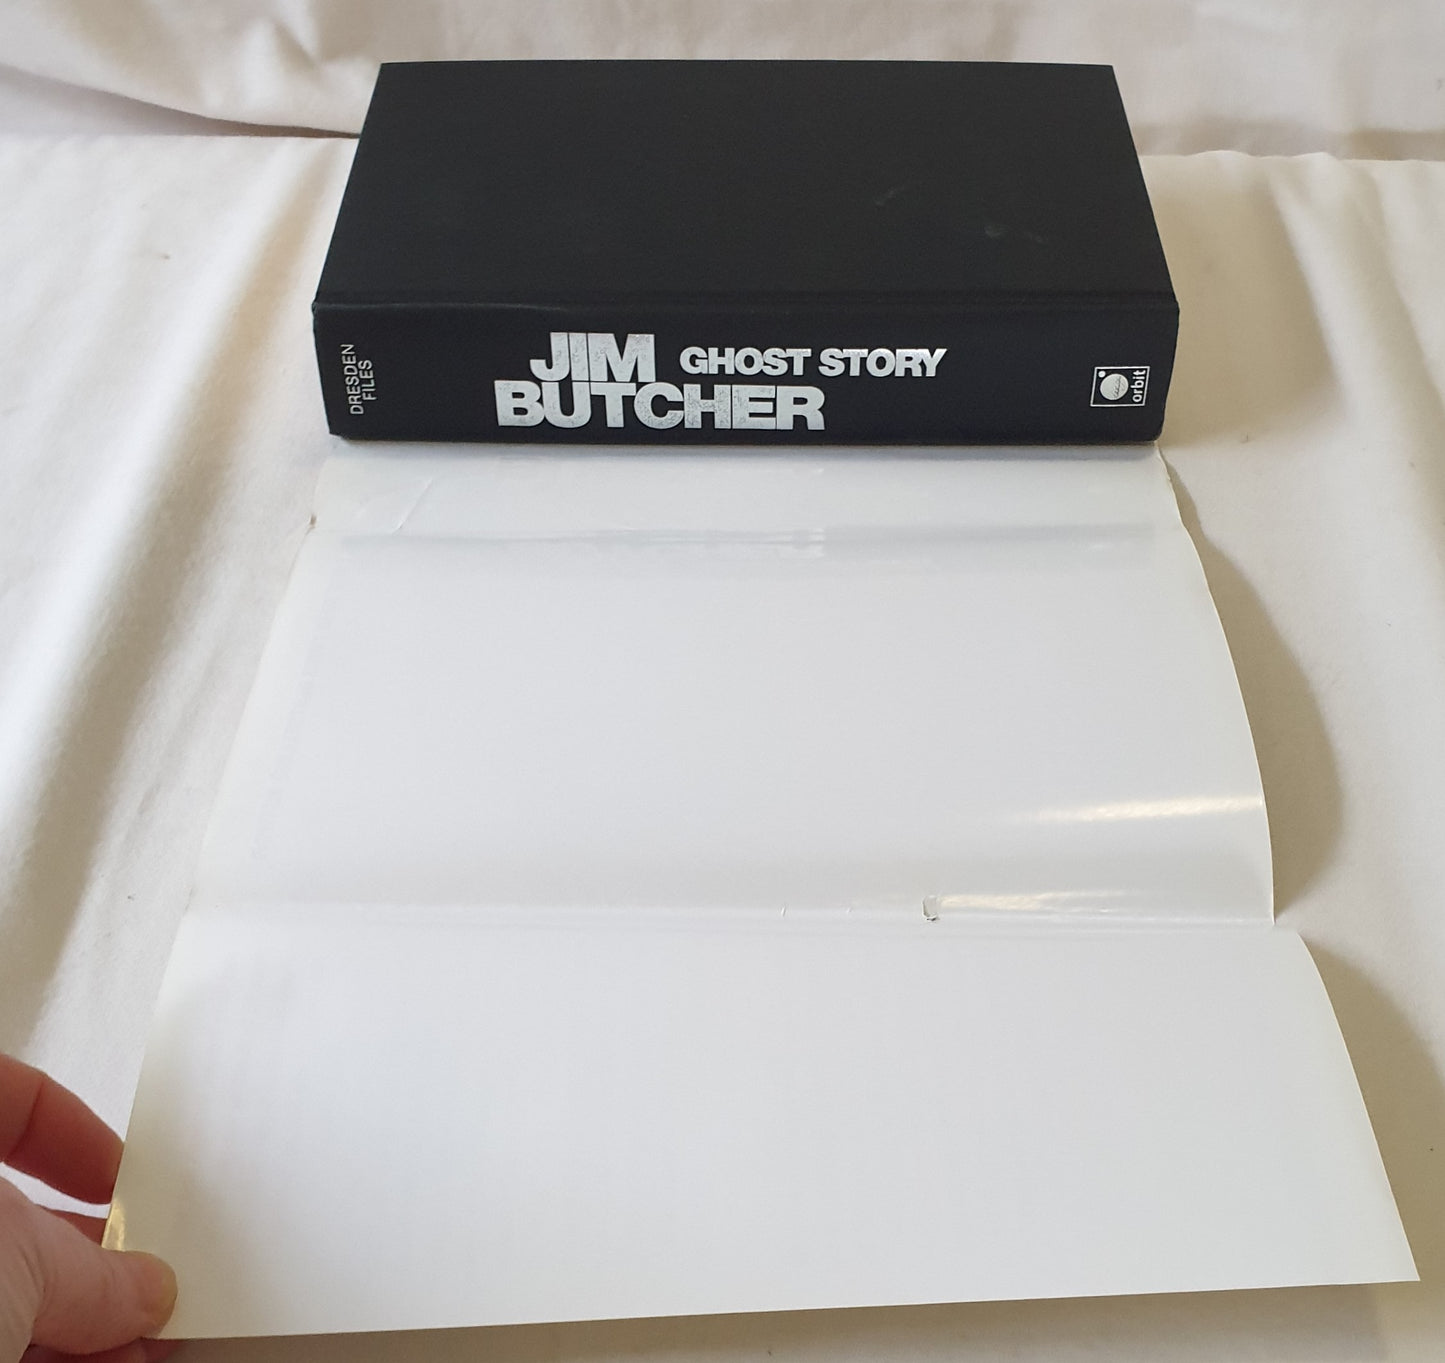 Ghost Story by Jim Butcher